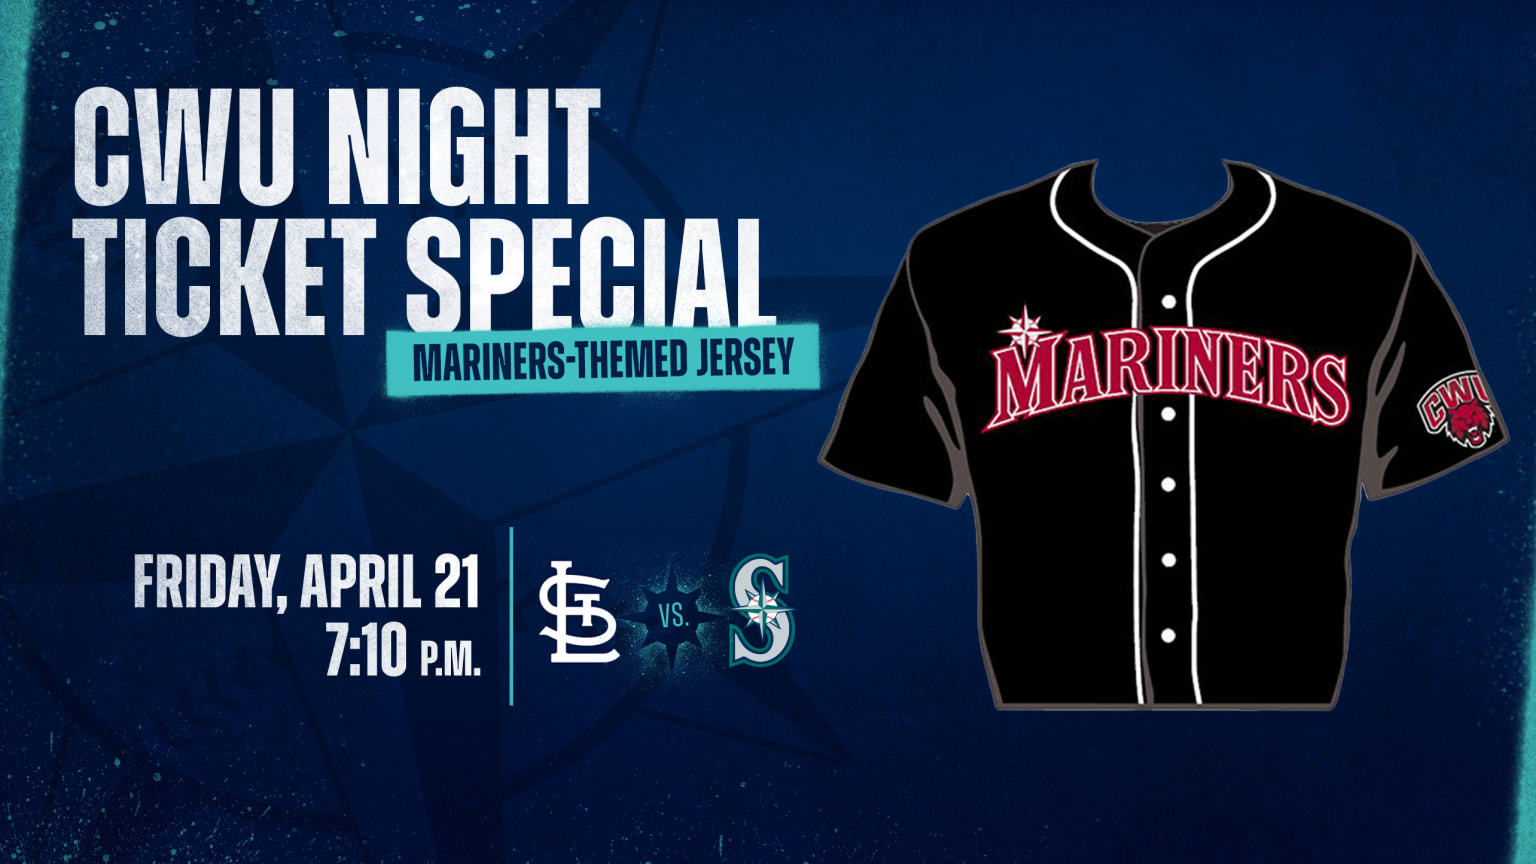 MARINERS SUPPORT COMMUNITY WITH JERSEY AUCTION